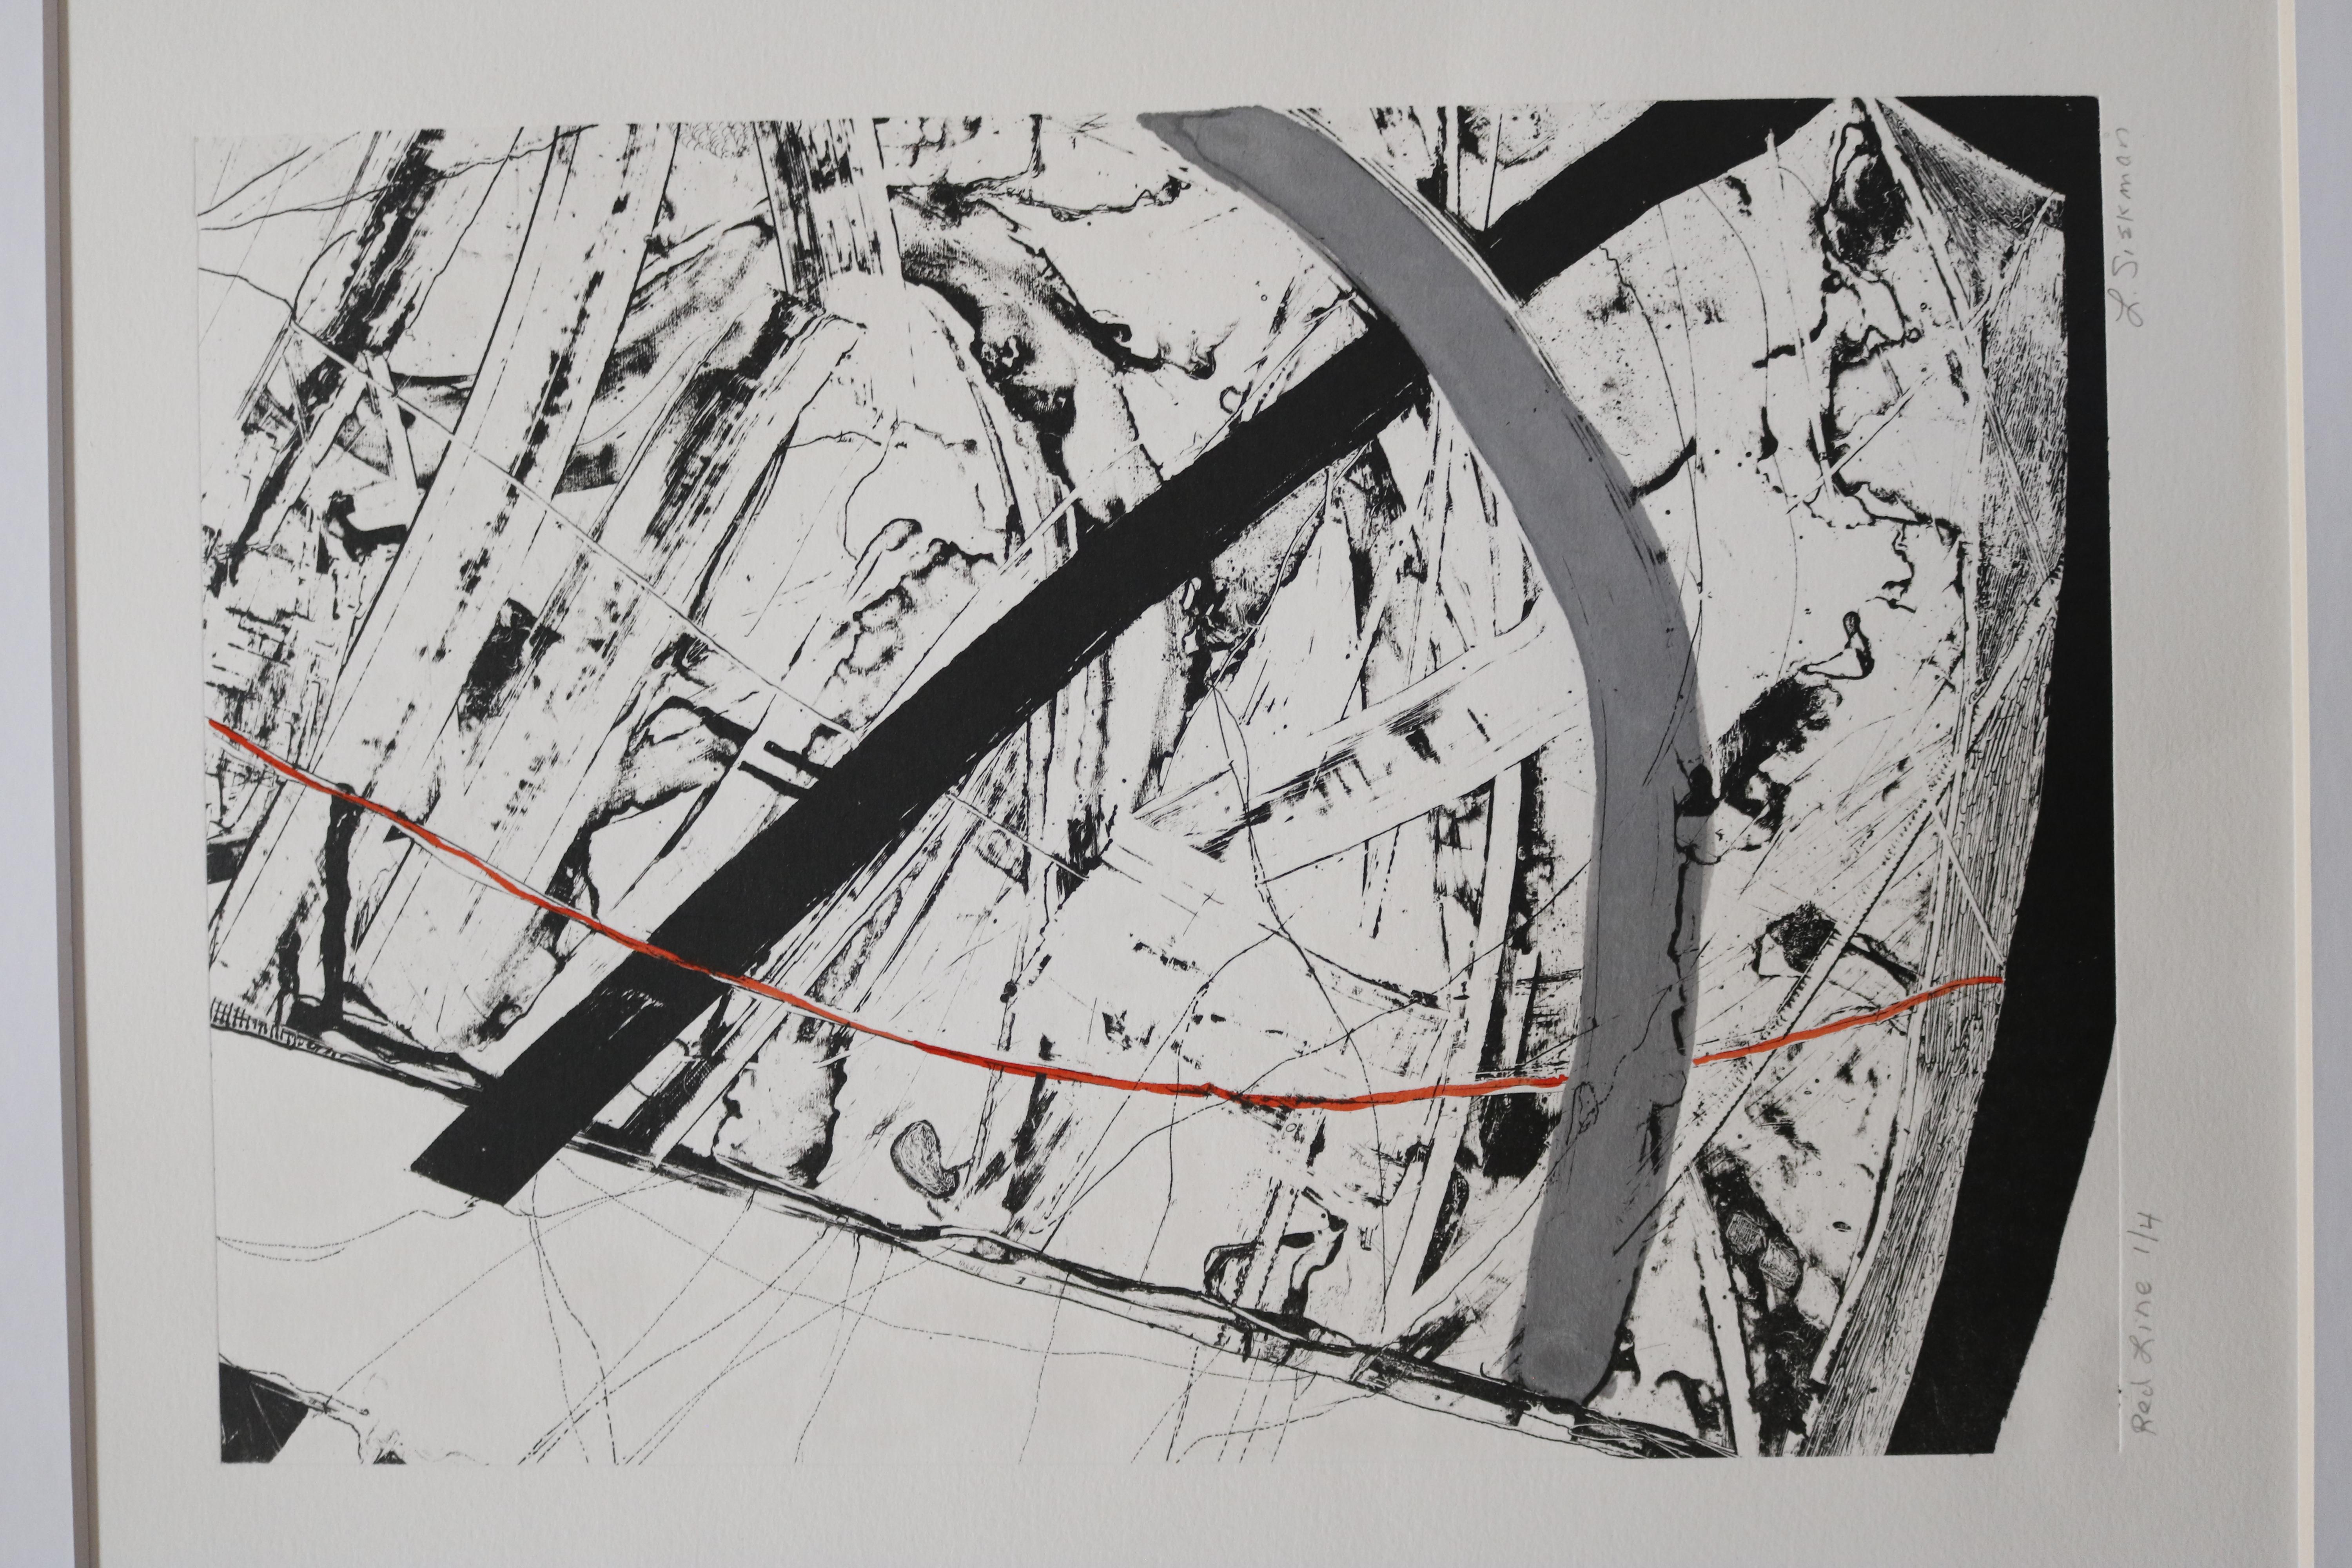 An intriguing, clean abstract lithograph in greyscale with one bold red line crossing the piece. Signed L. Siekman.
Signed and numbered 1/4. Sold unframed.
We have several lithographs (various dimensions) by this painter. They would be great